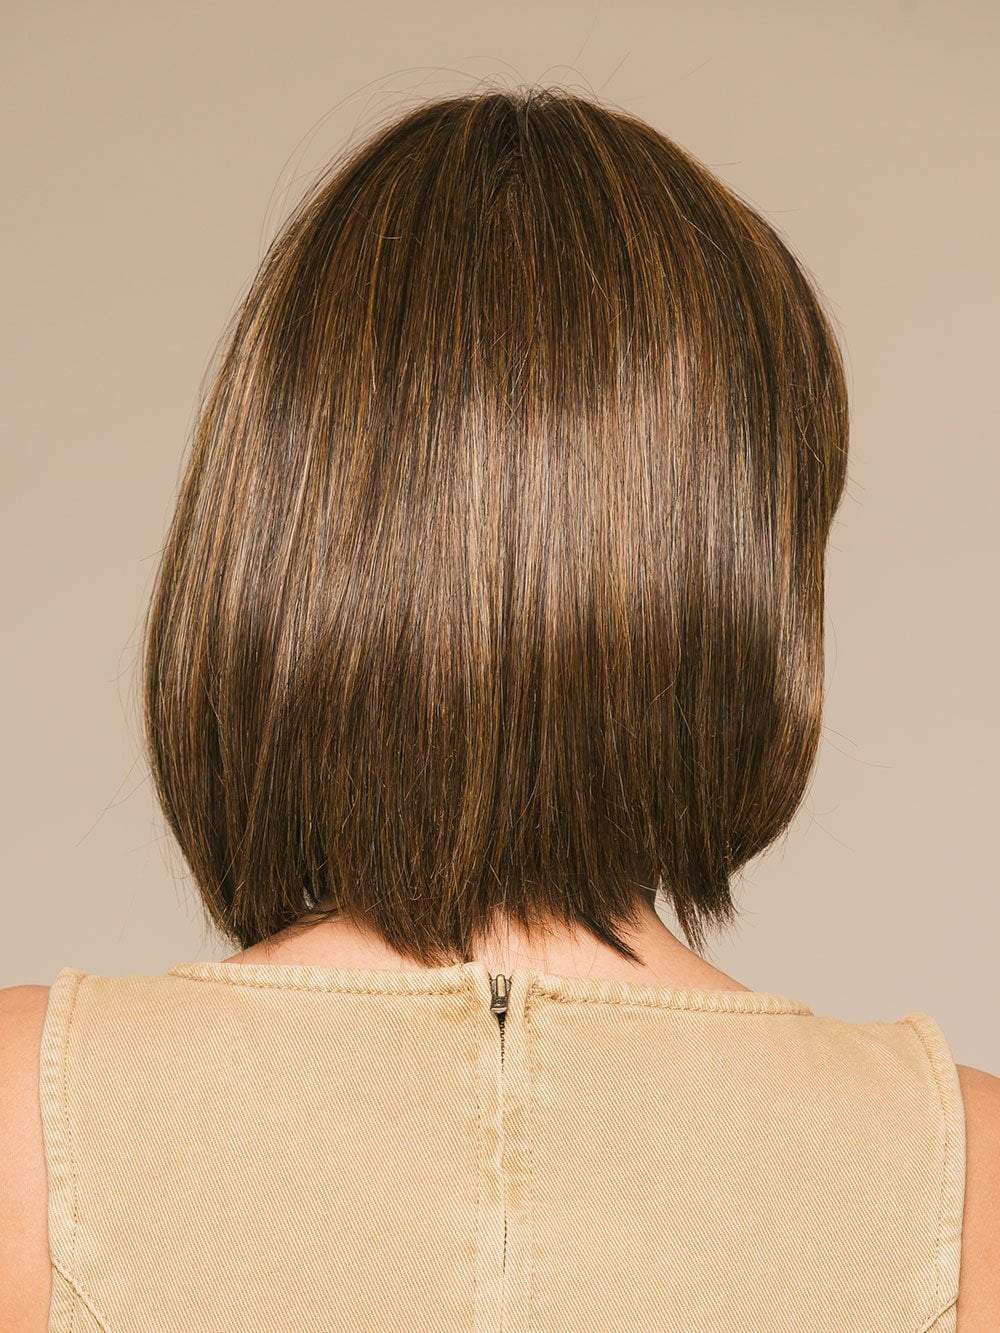 CLASSIC CUT by RAQUEL WELCH in RL5/27 GINGER BROWN | Warm Medium Brown Evenly Blended with Medium Golden Blonde